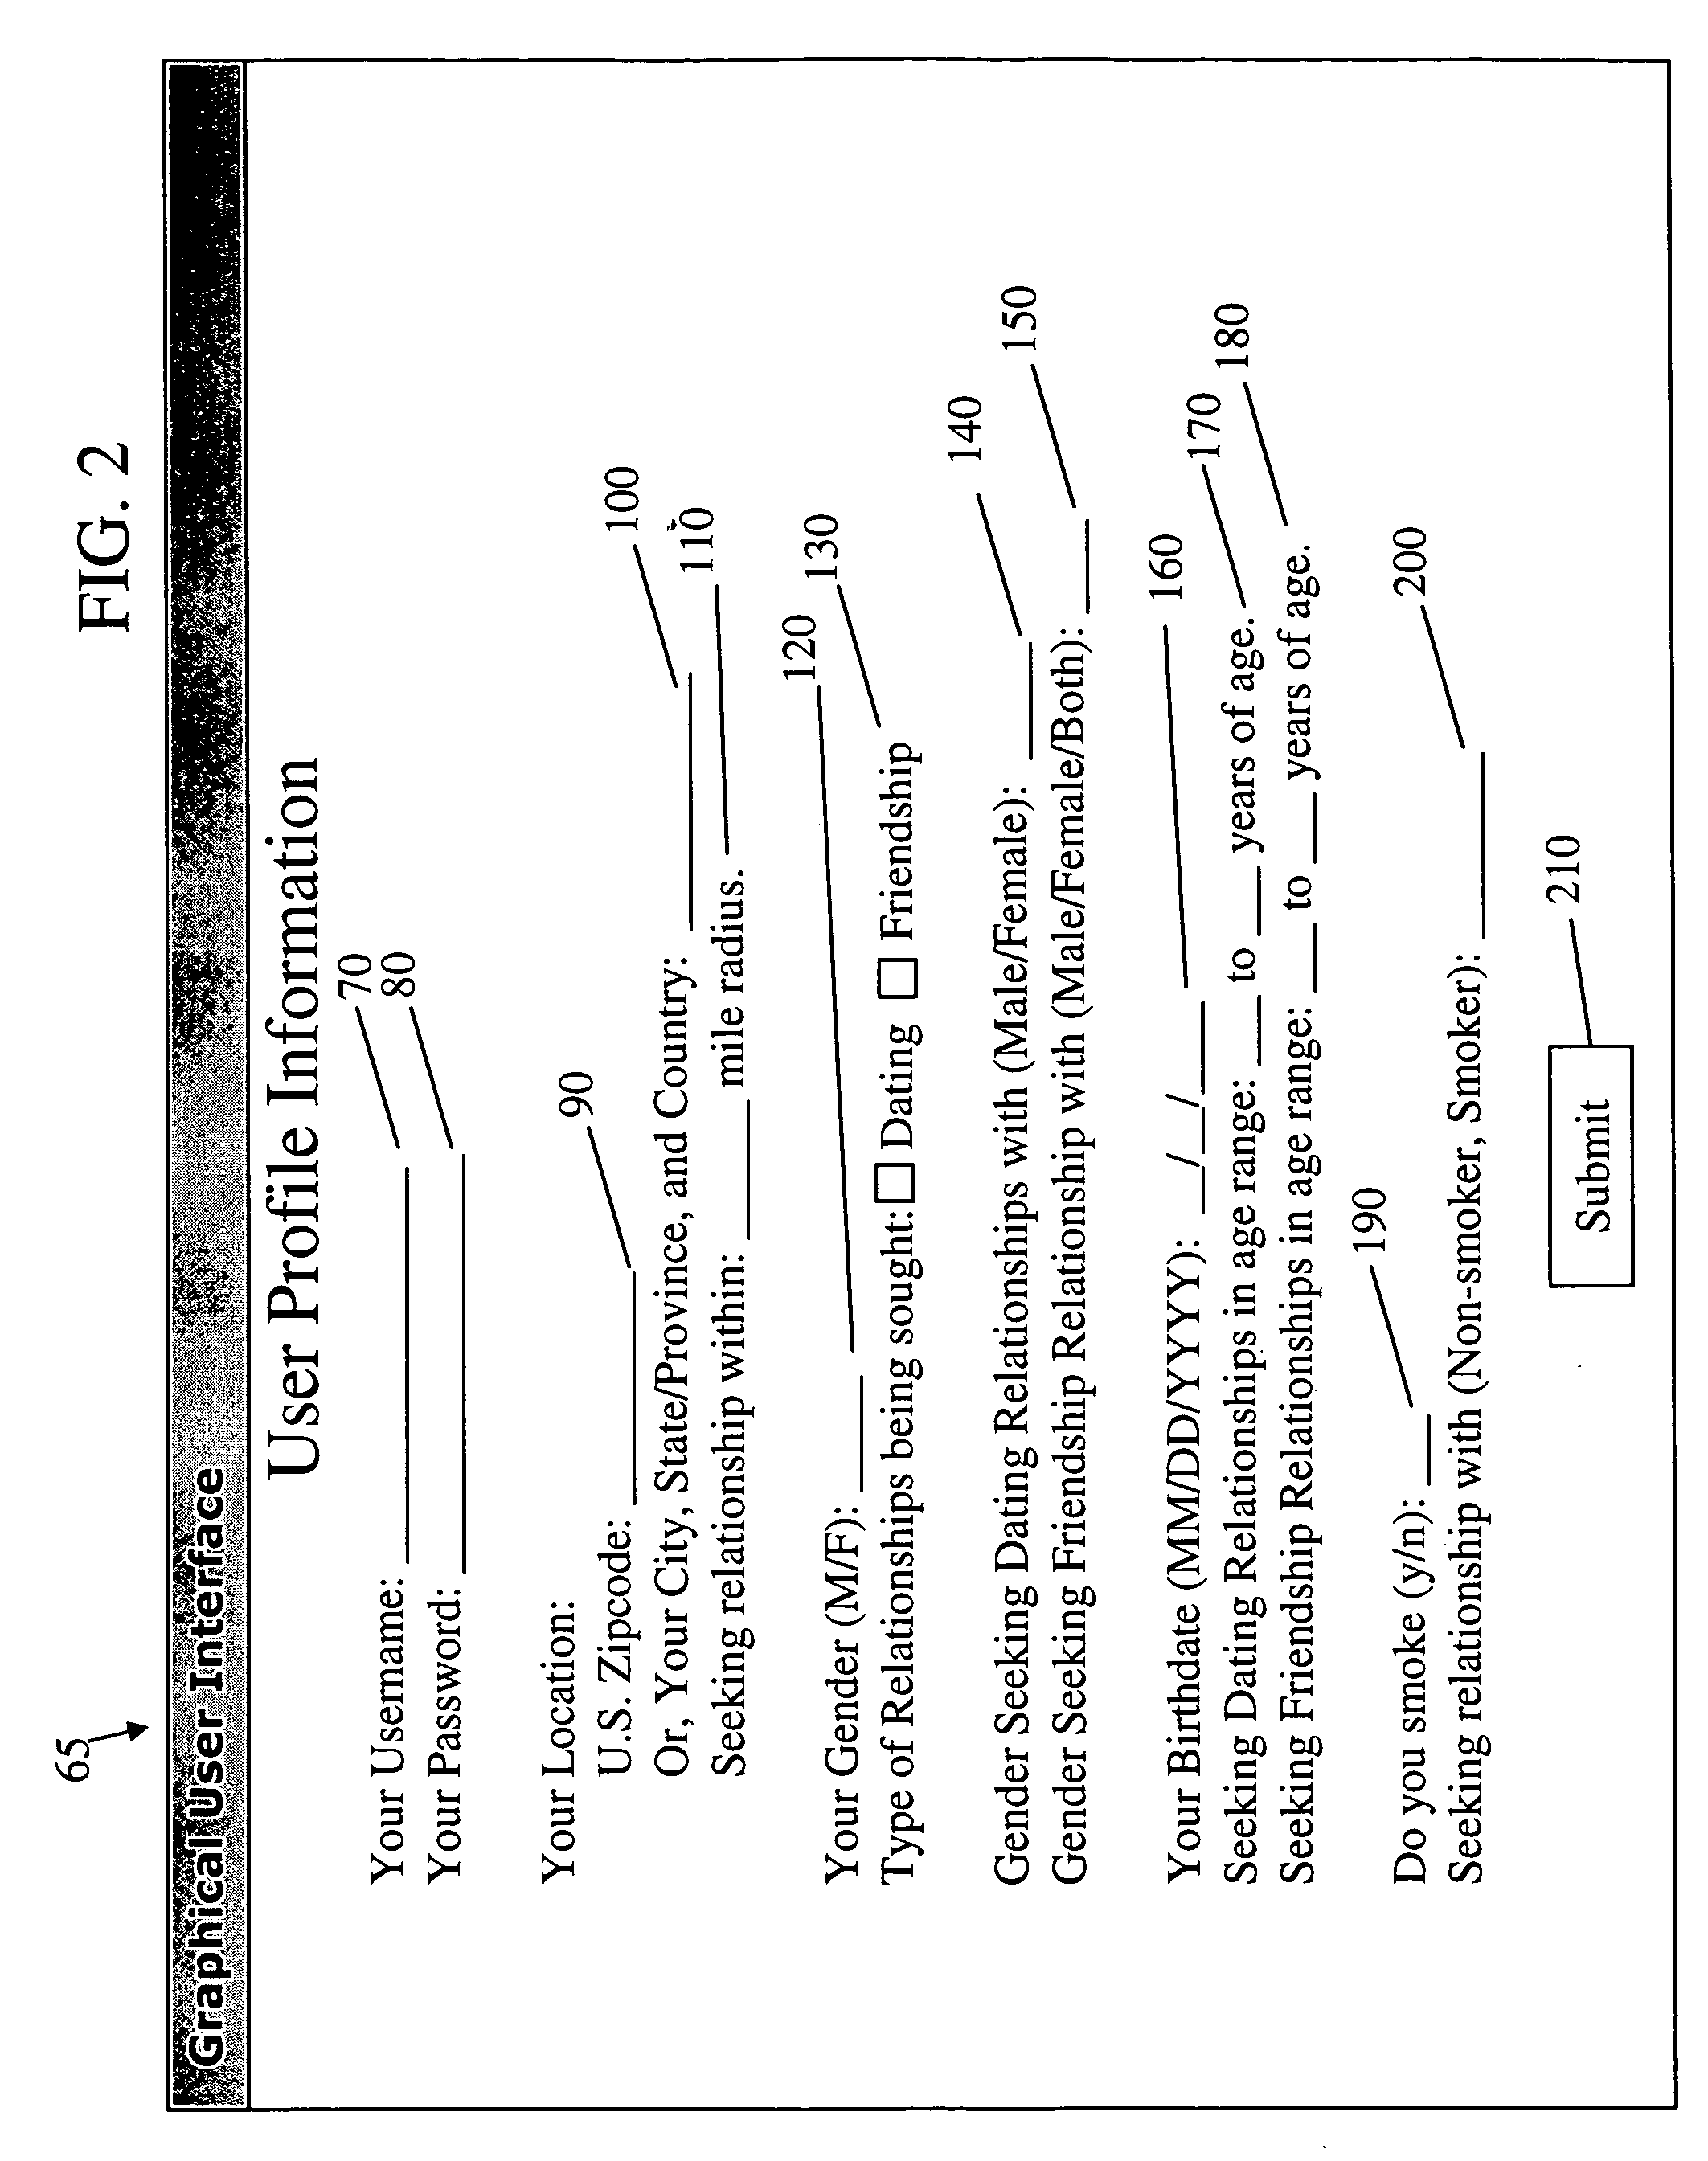 Method and system for matching users for relationships using a discussion based approach